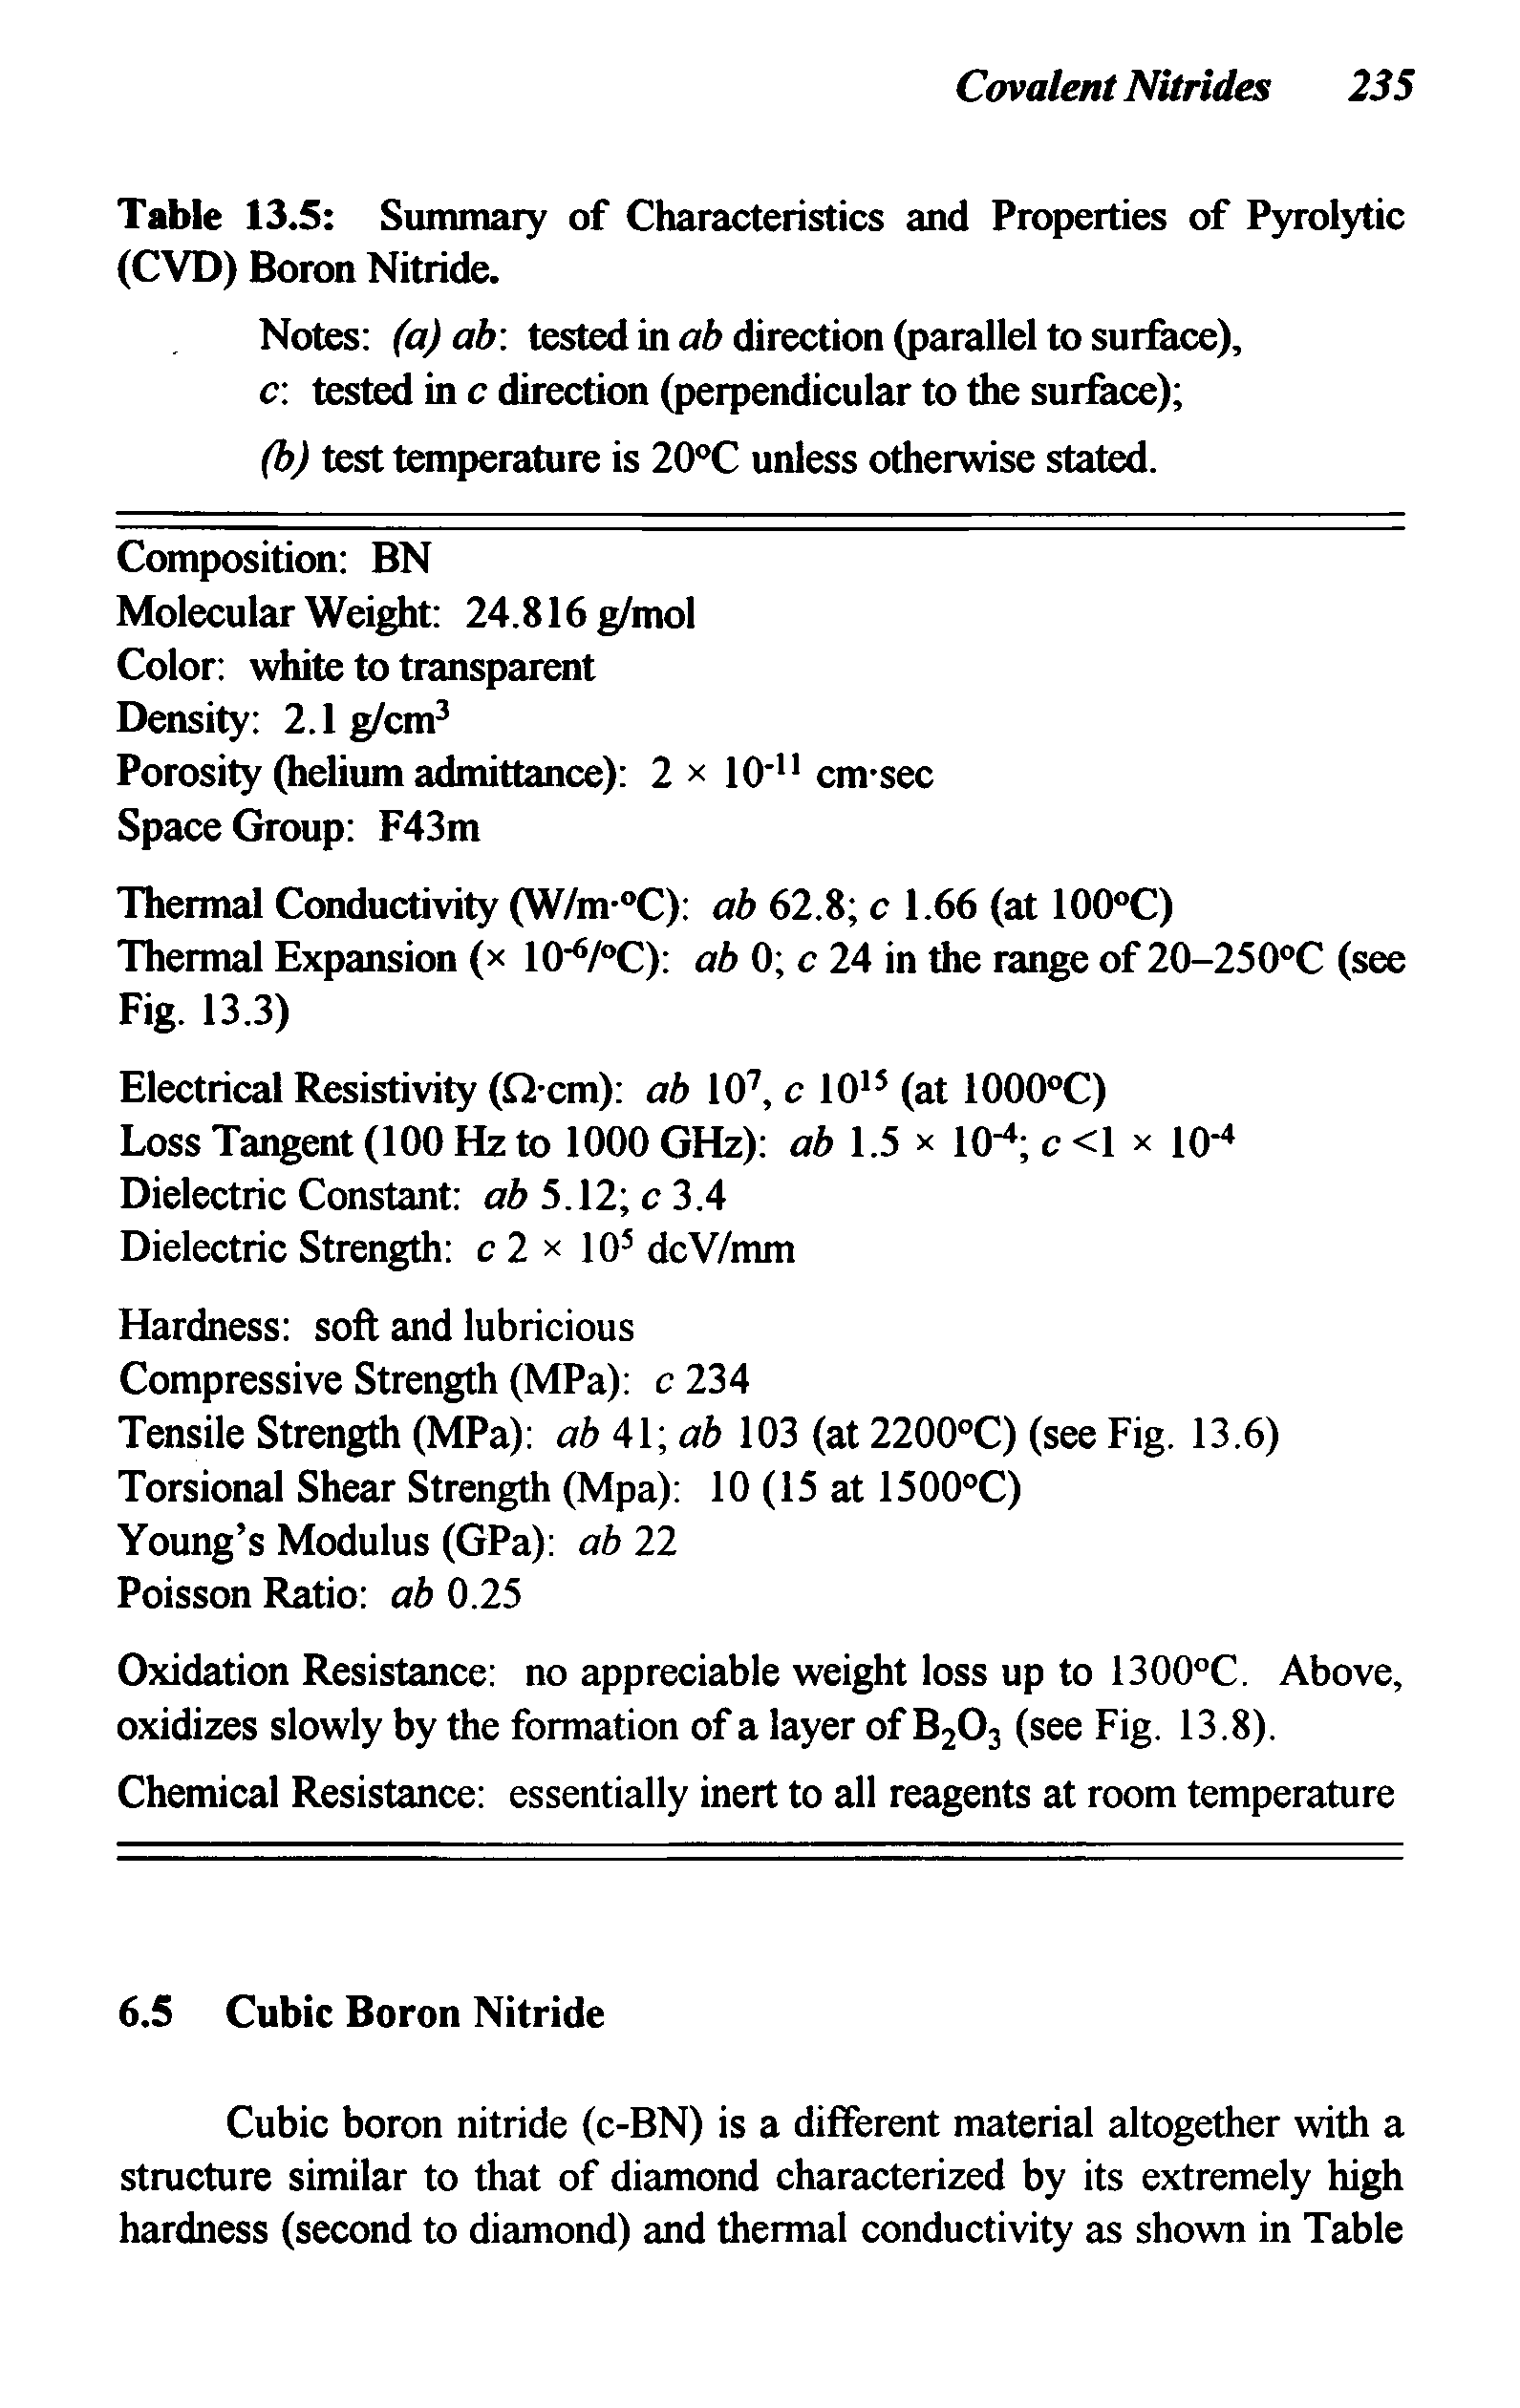 Table 13.5 Summary of Characteristics and Properties of P5 olytic (CVD) Boron Nitride.